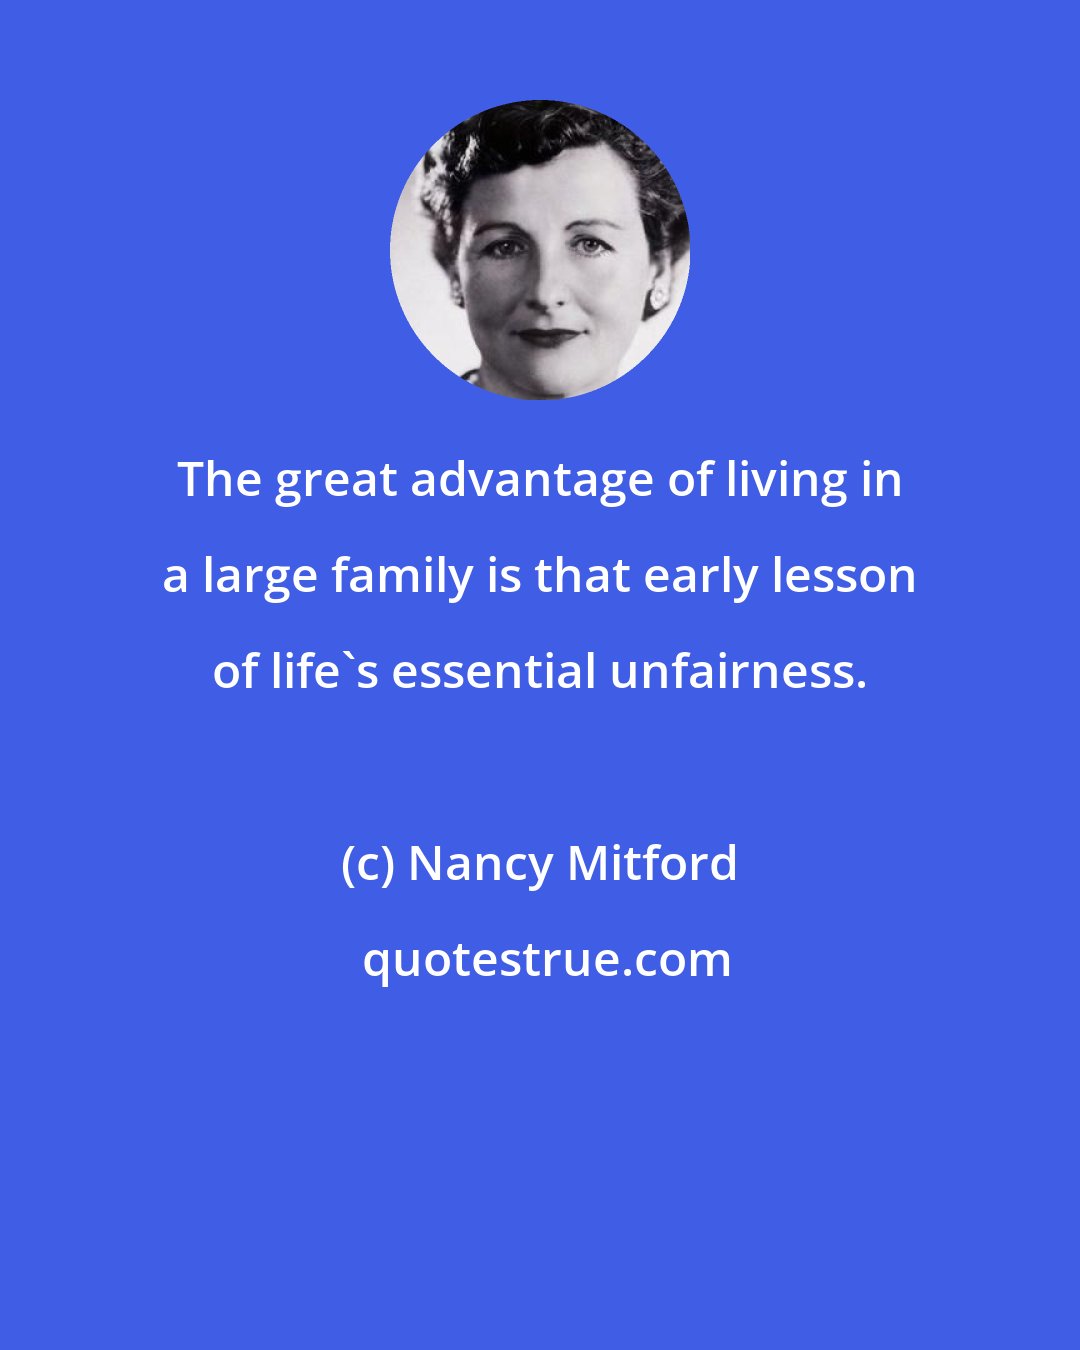 Nancy Mitford: The great advantage of living in a large family is that early lesson of life's essential unfairness.